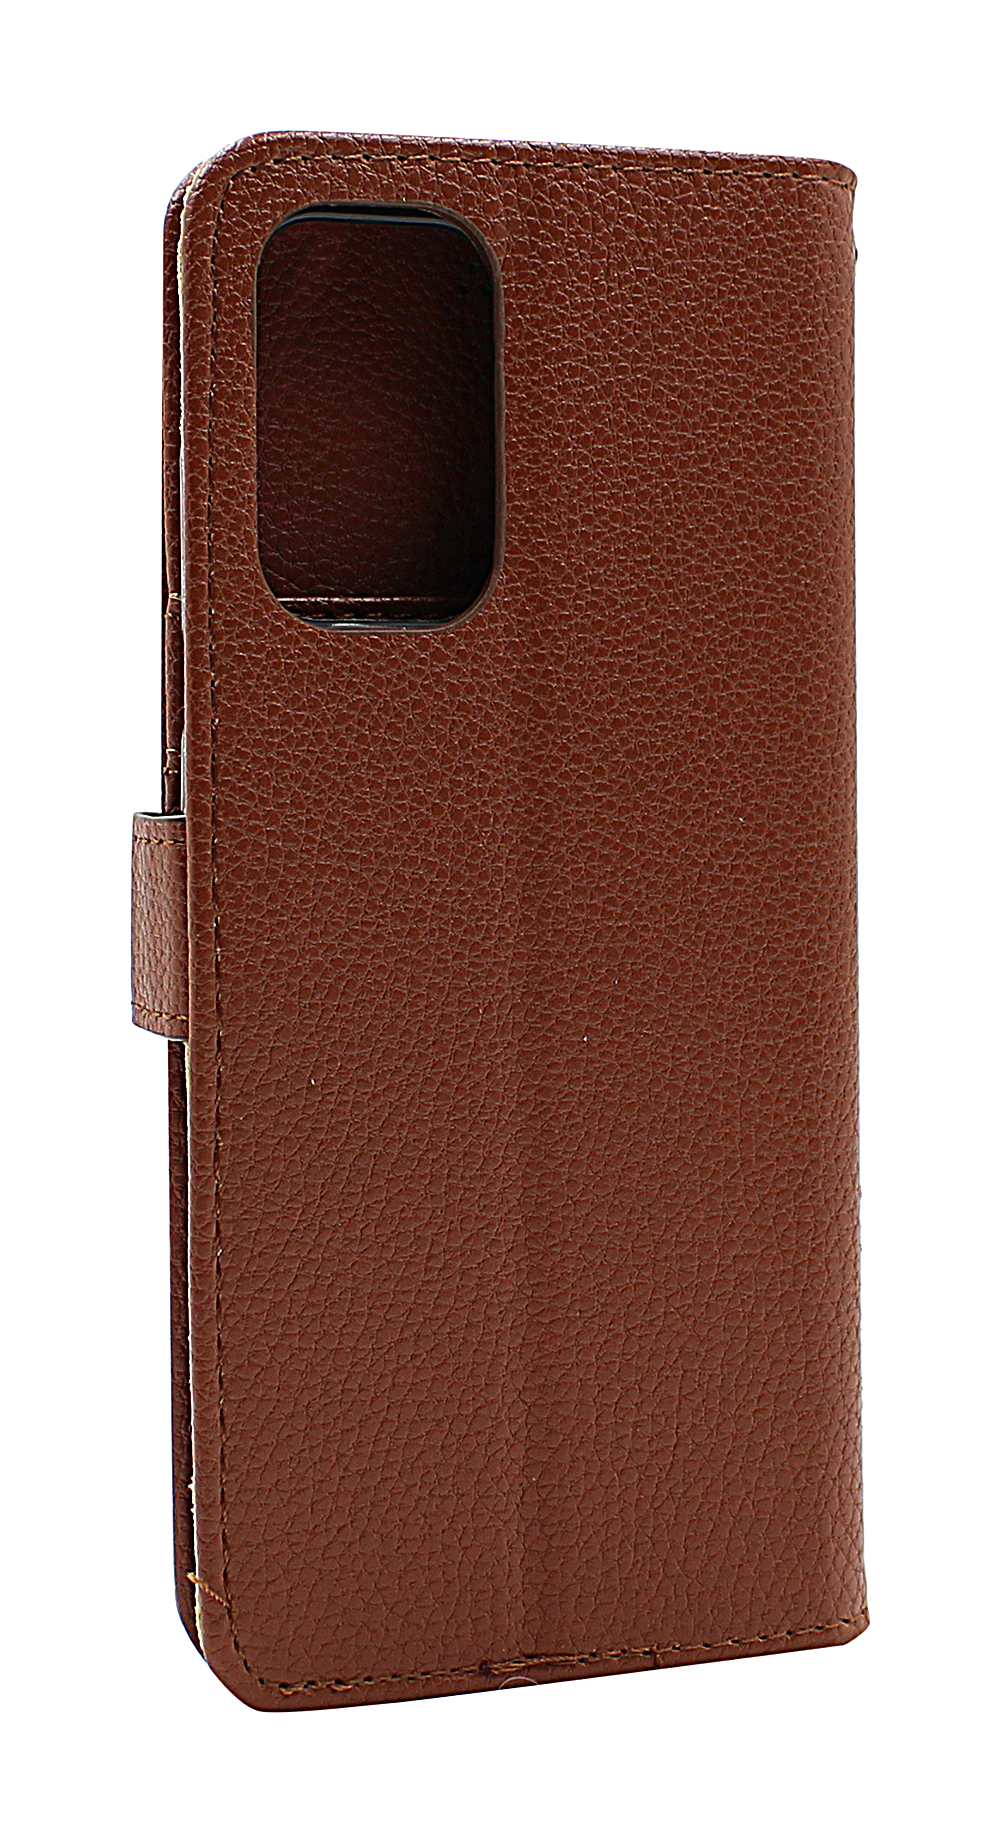 New Standcase Wallet Samsung Galaxy A72 (A725F/DS)